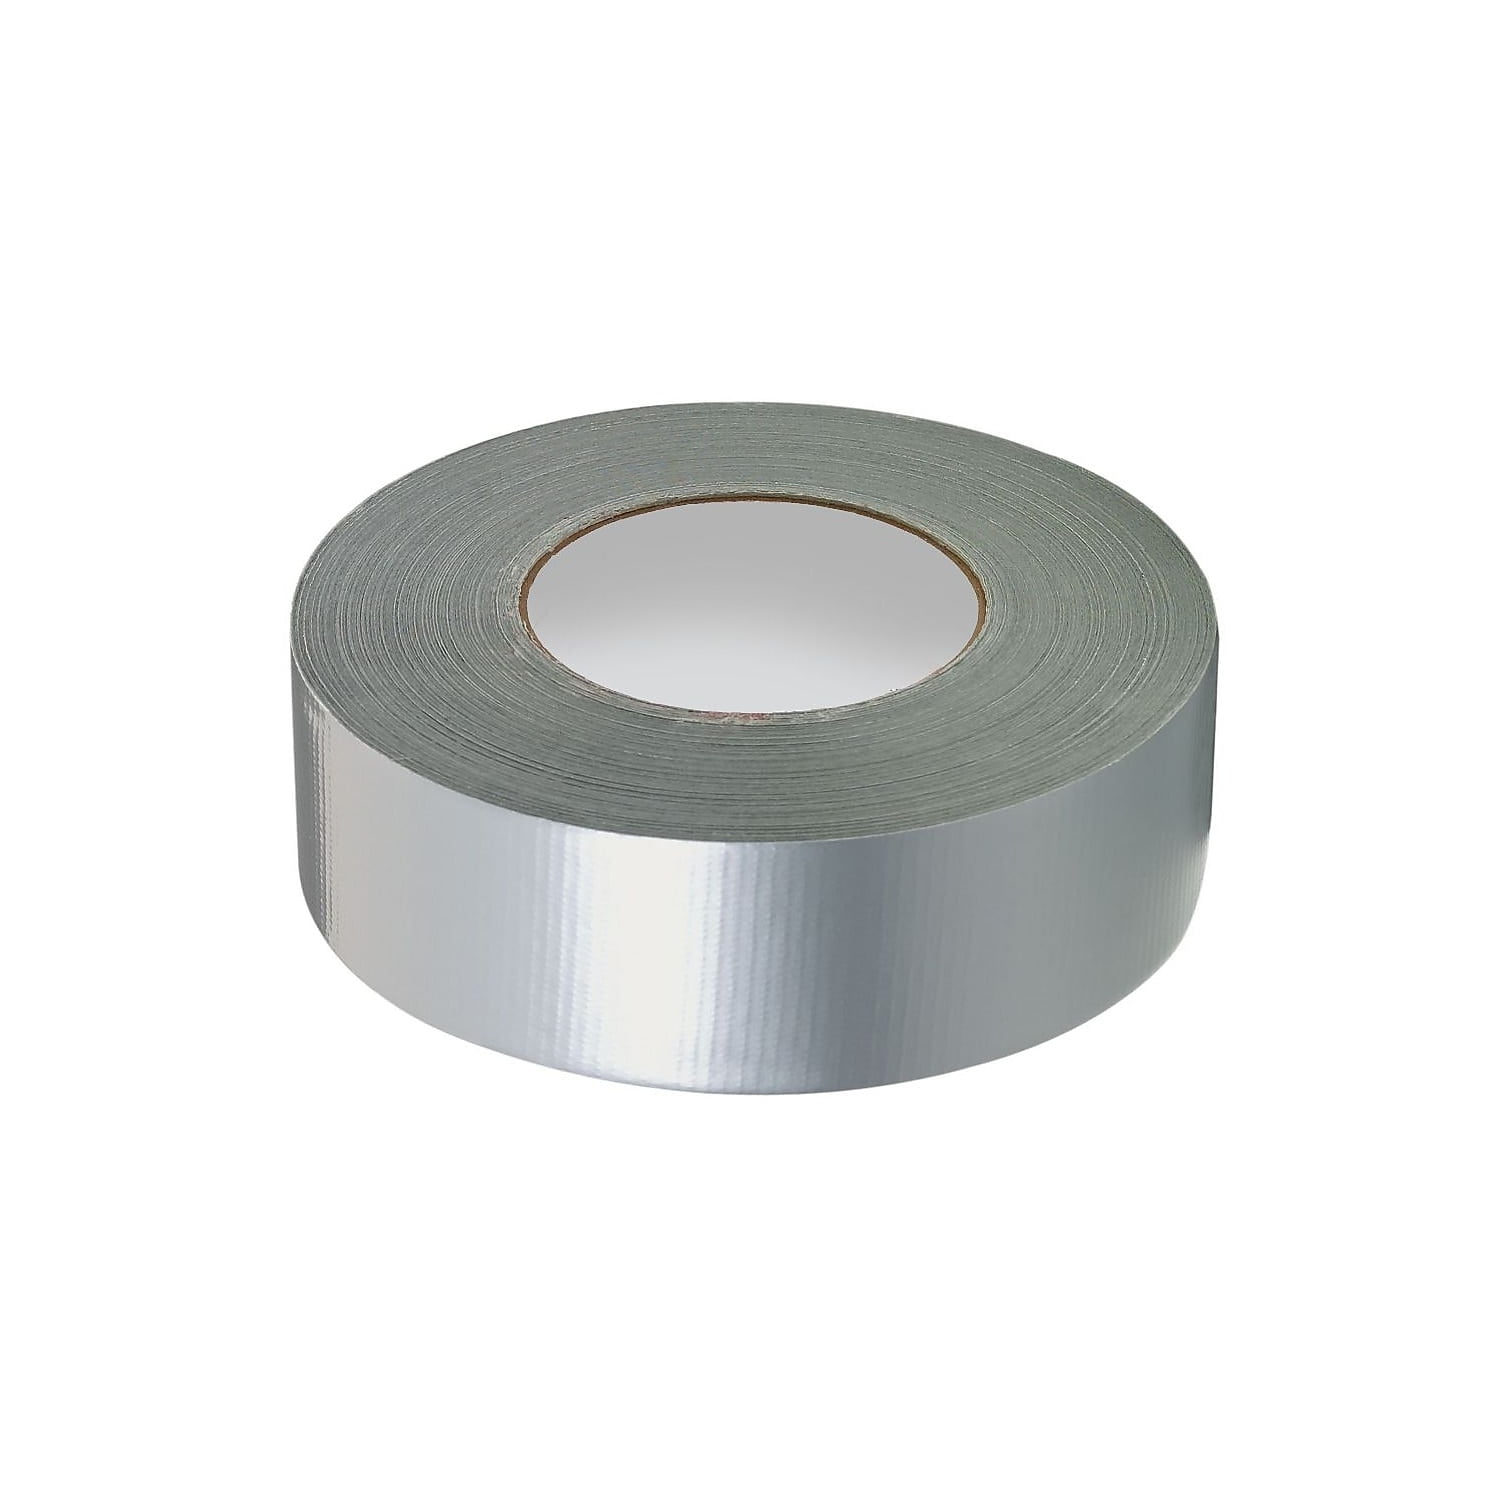 Utility Grade Silver Duct Tape 2 x 60 Yards 8 Mil Waterproof Tapes 48 Rolls